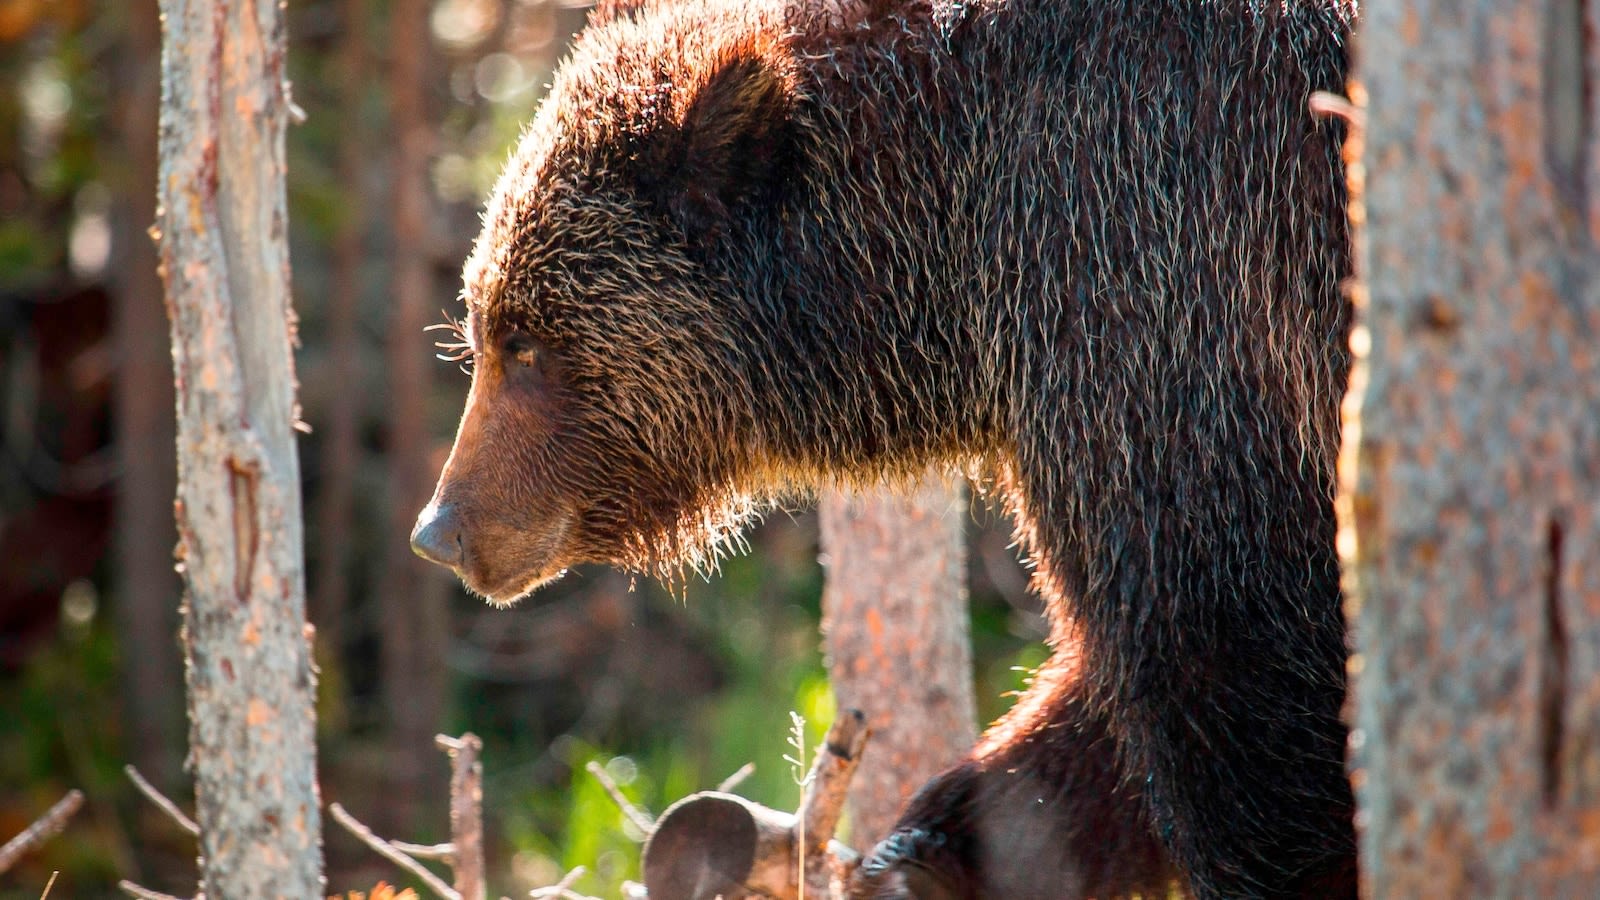 35-year-old man survives grizzly bear attack after encountering 2 of them at national park